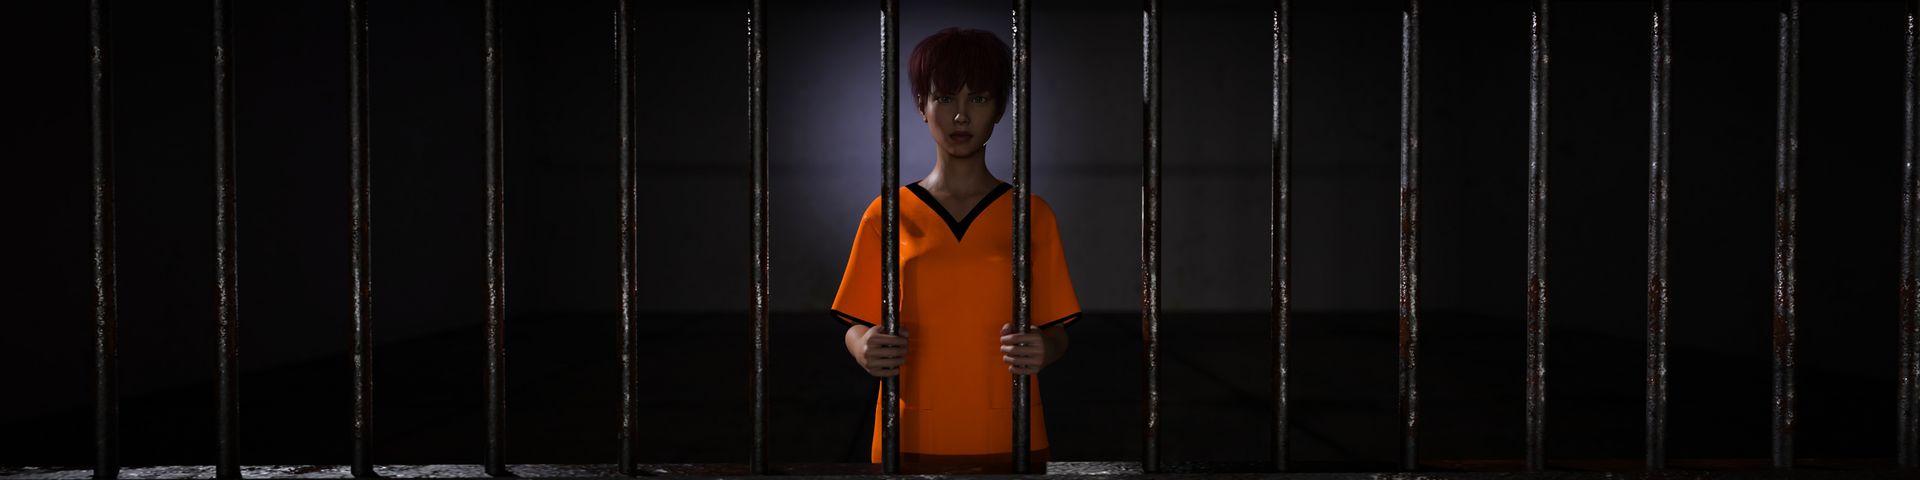 Prison Life Apk Android Adult Game Download (15)